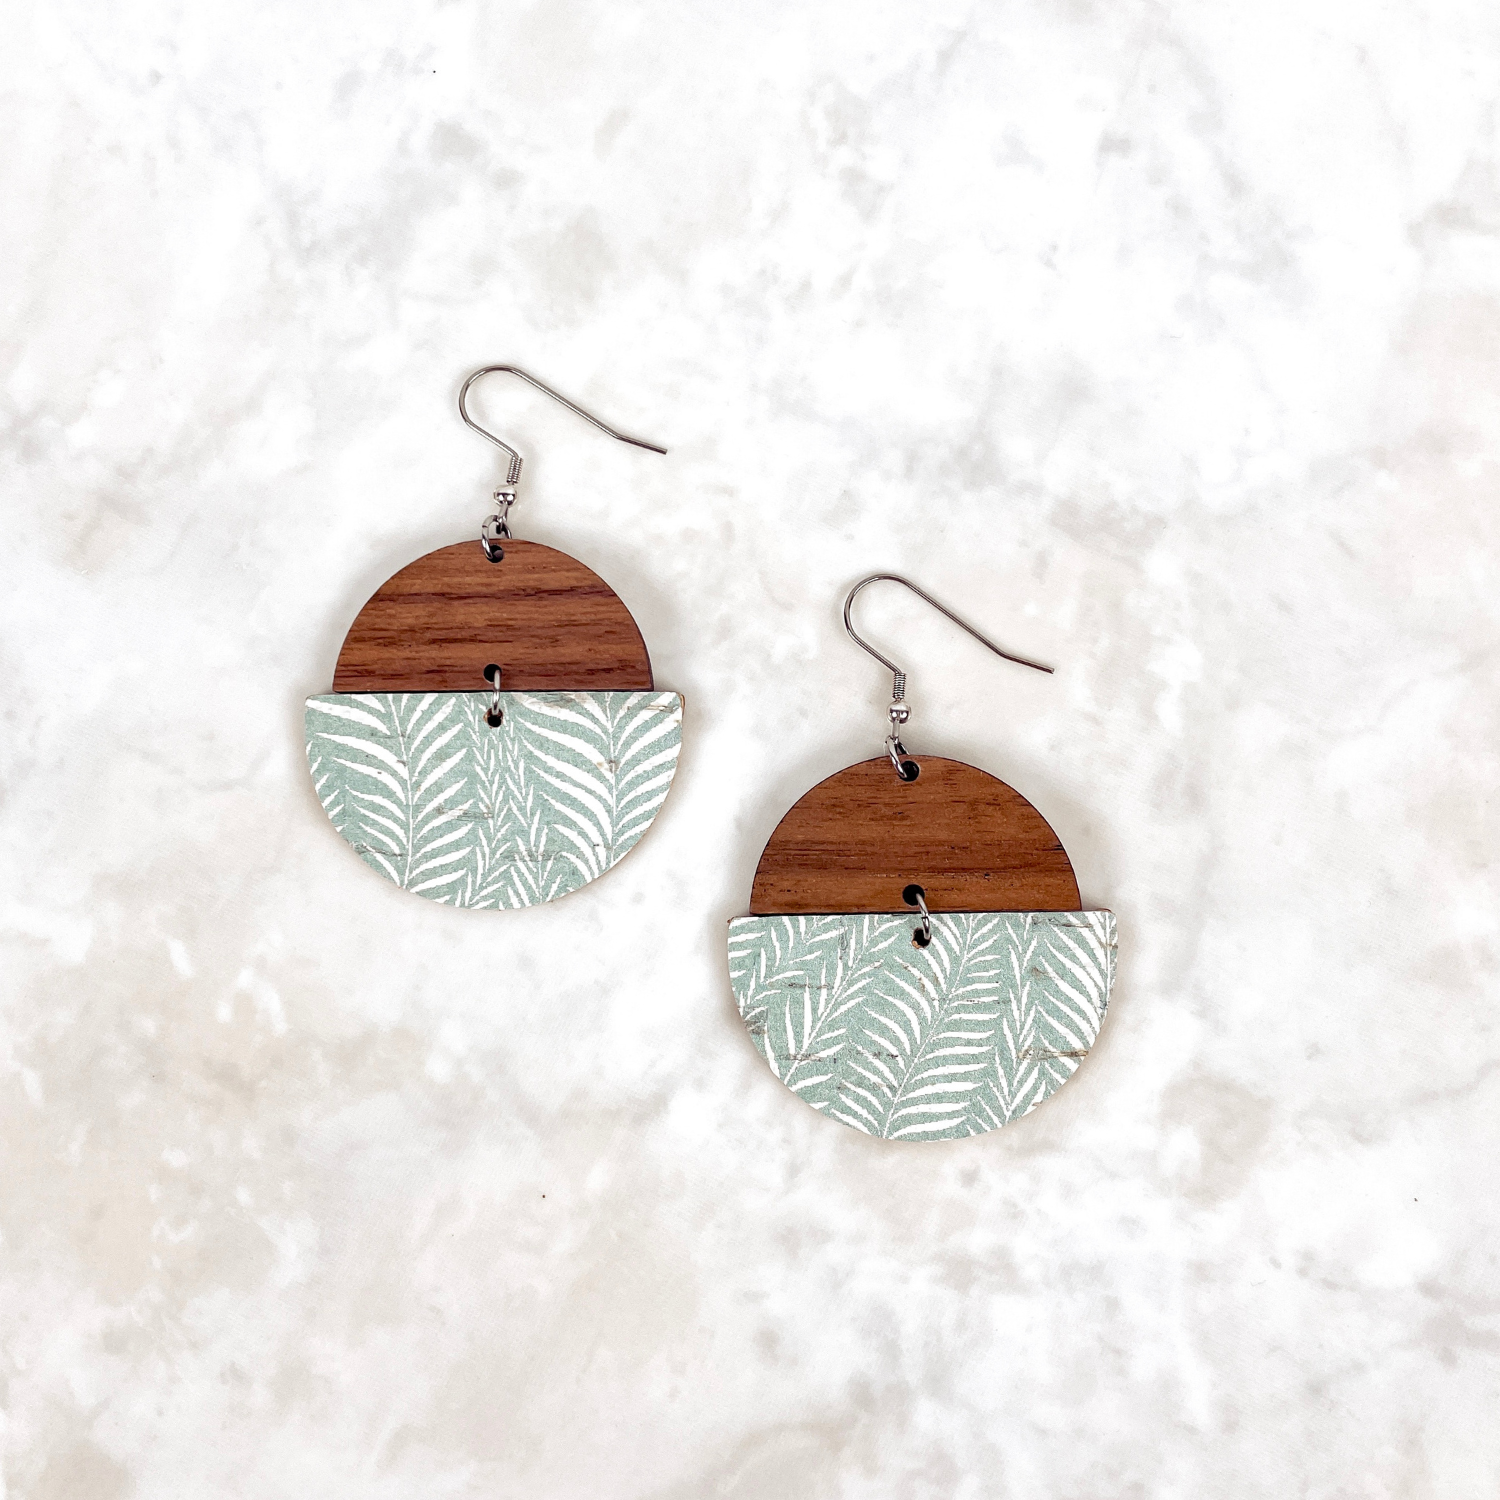 Everly Cork and Wood Handcrafted Round Earrings-Teal Leaves